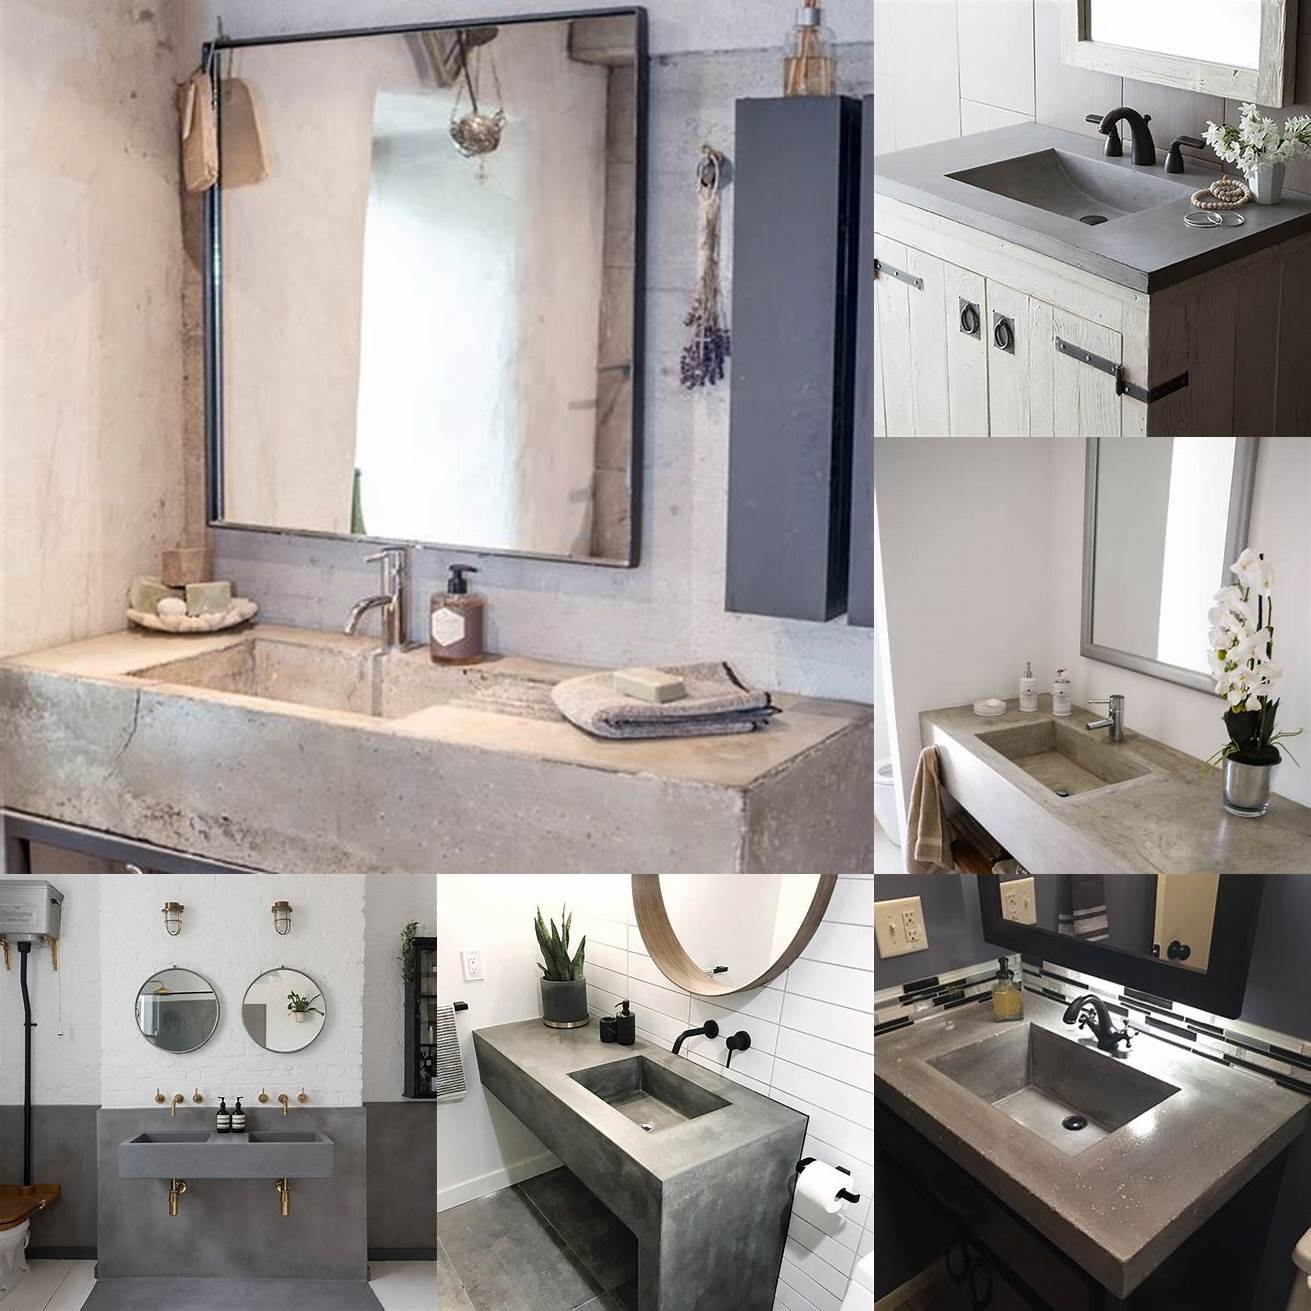 Industrial-style vanity with concrete countertop